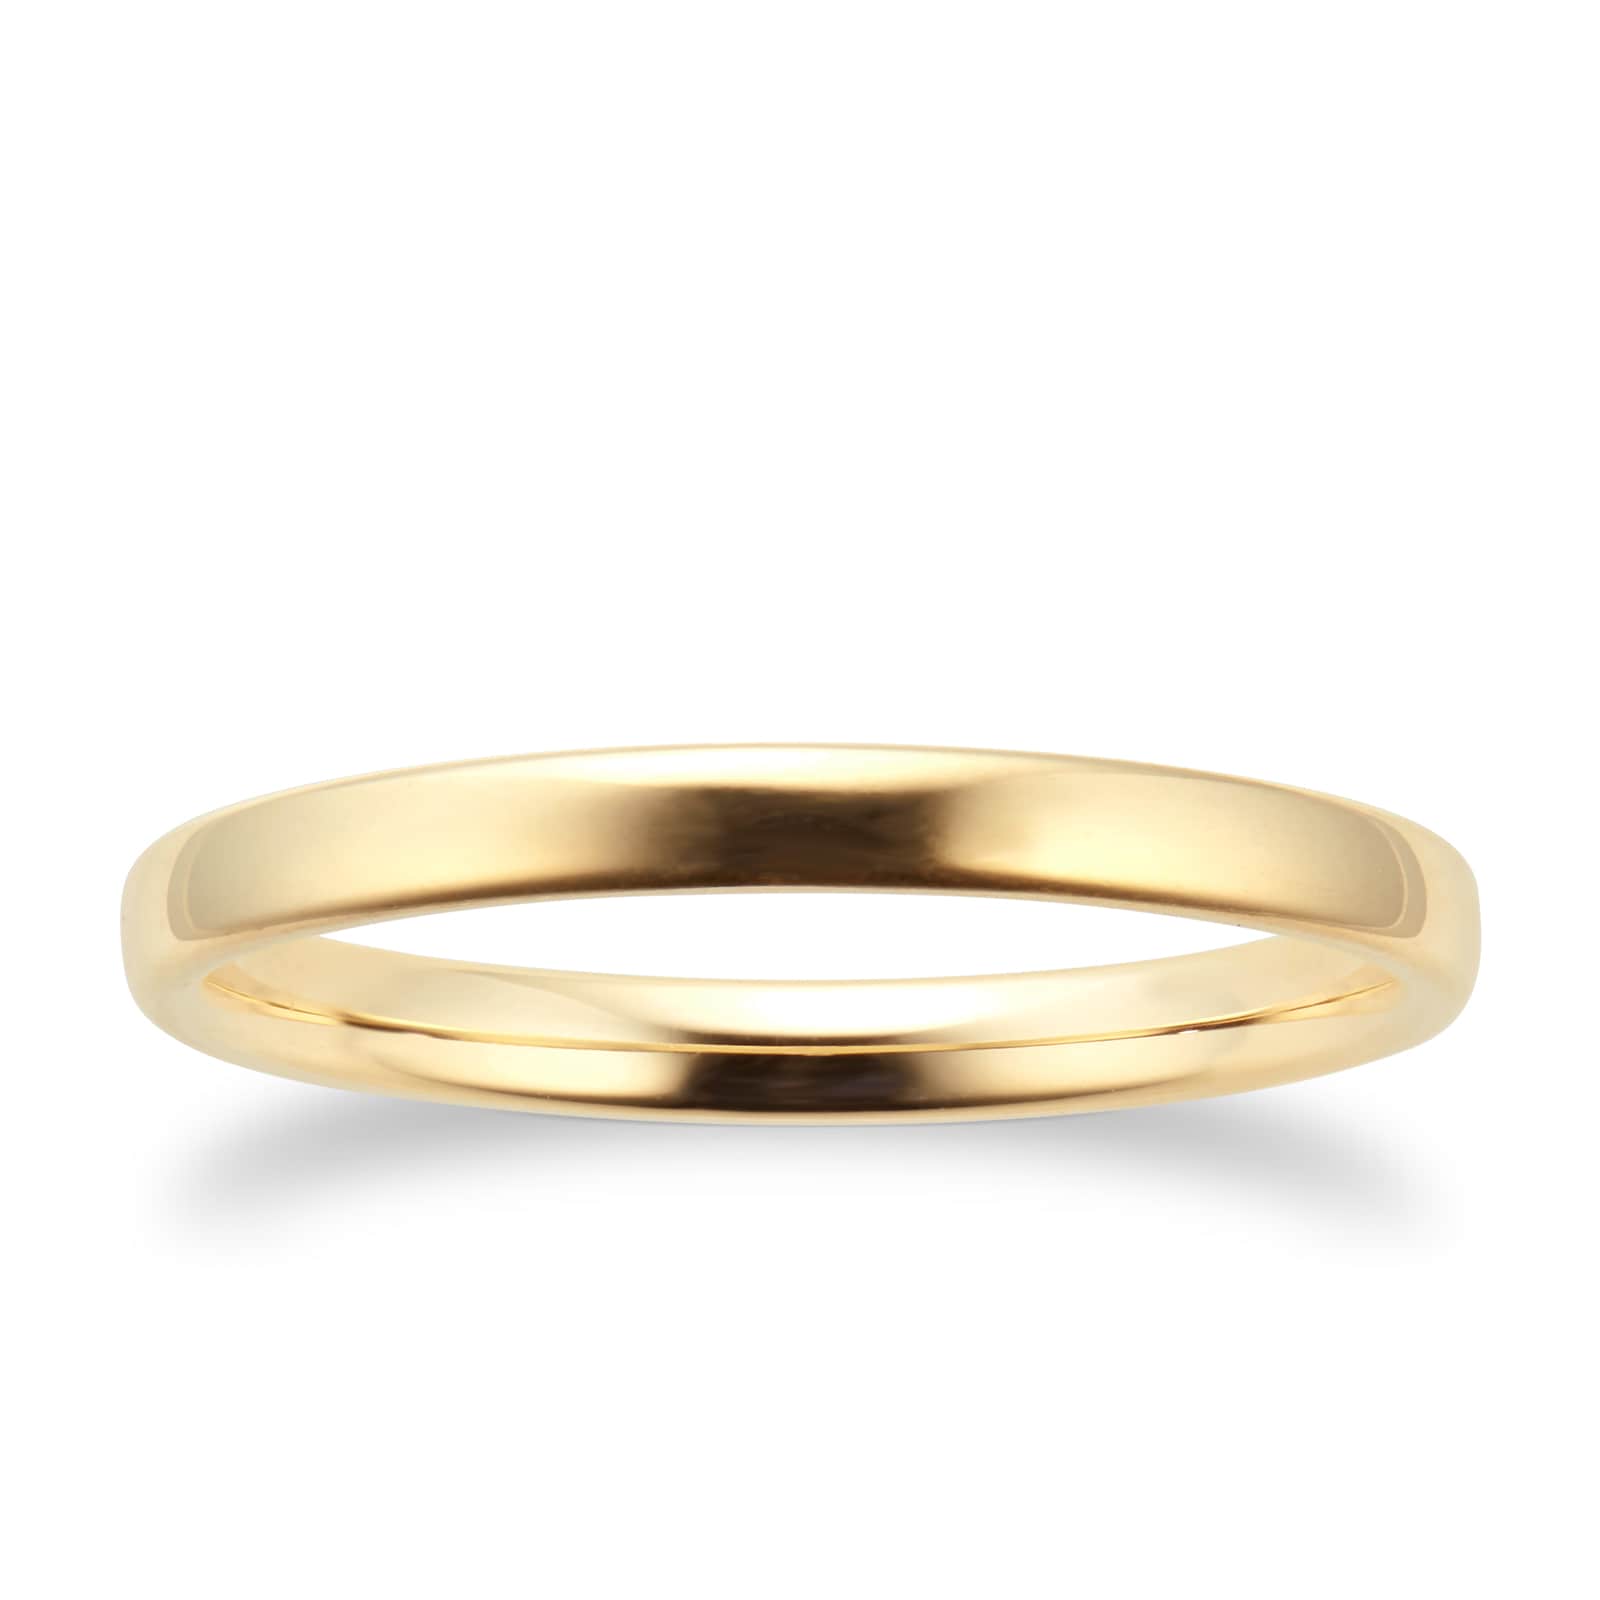 2mm Slight Court Standard Wedding Ring In 9 Carat Yellow Gold Ring Size P